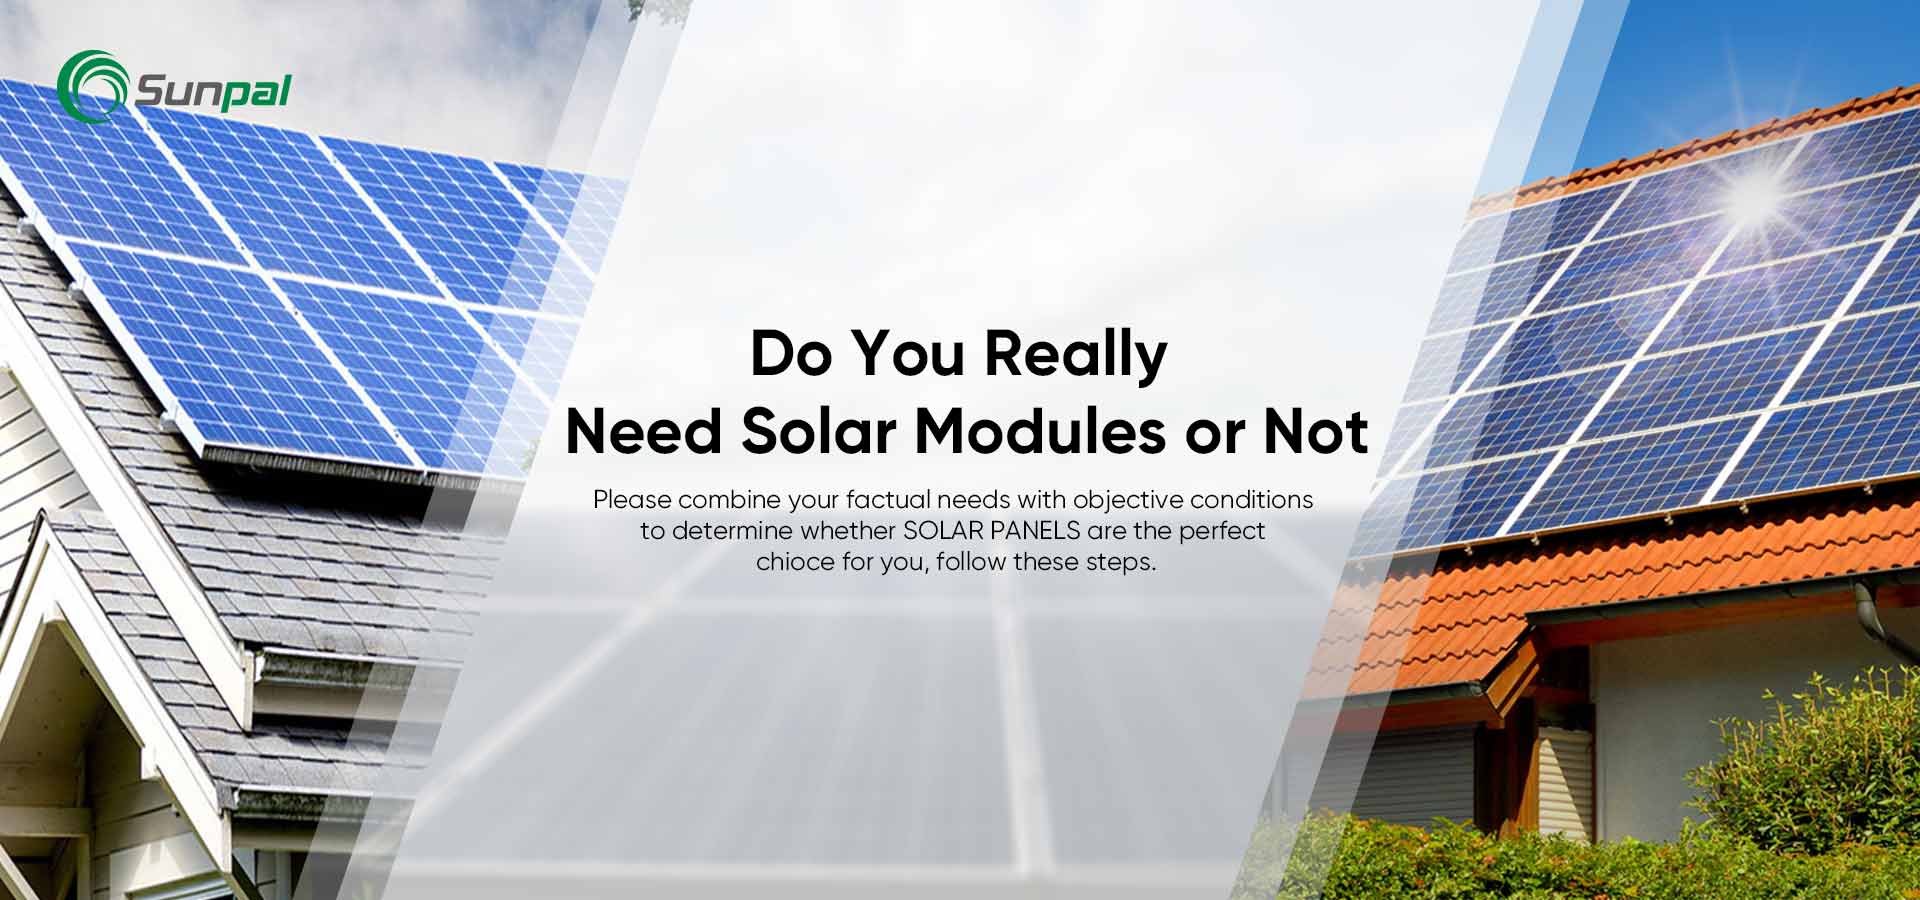 Is Solar Panels Right for You? 8 Signs You Should Go Solar